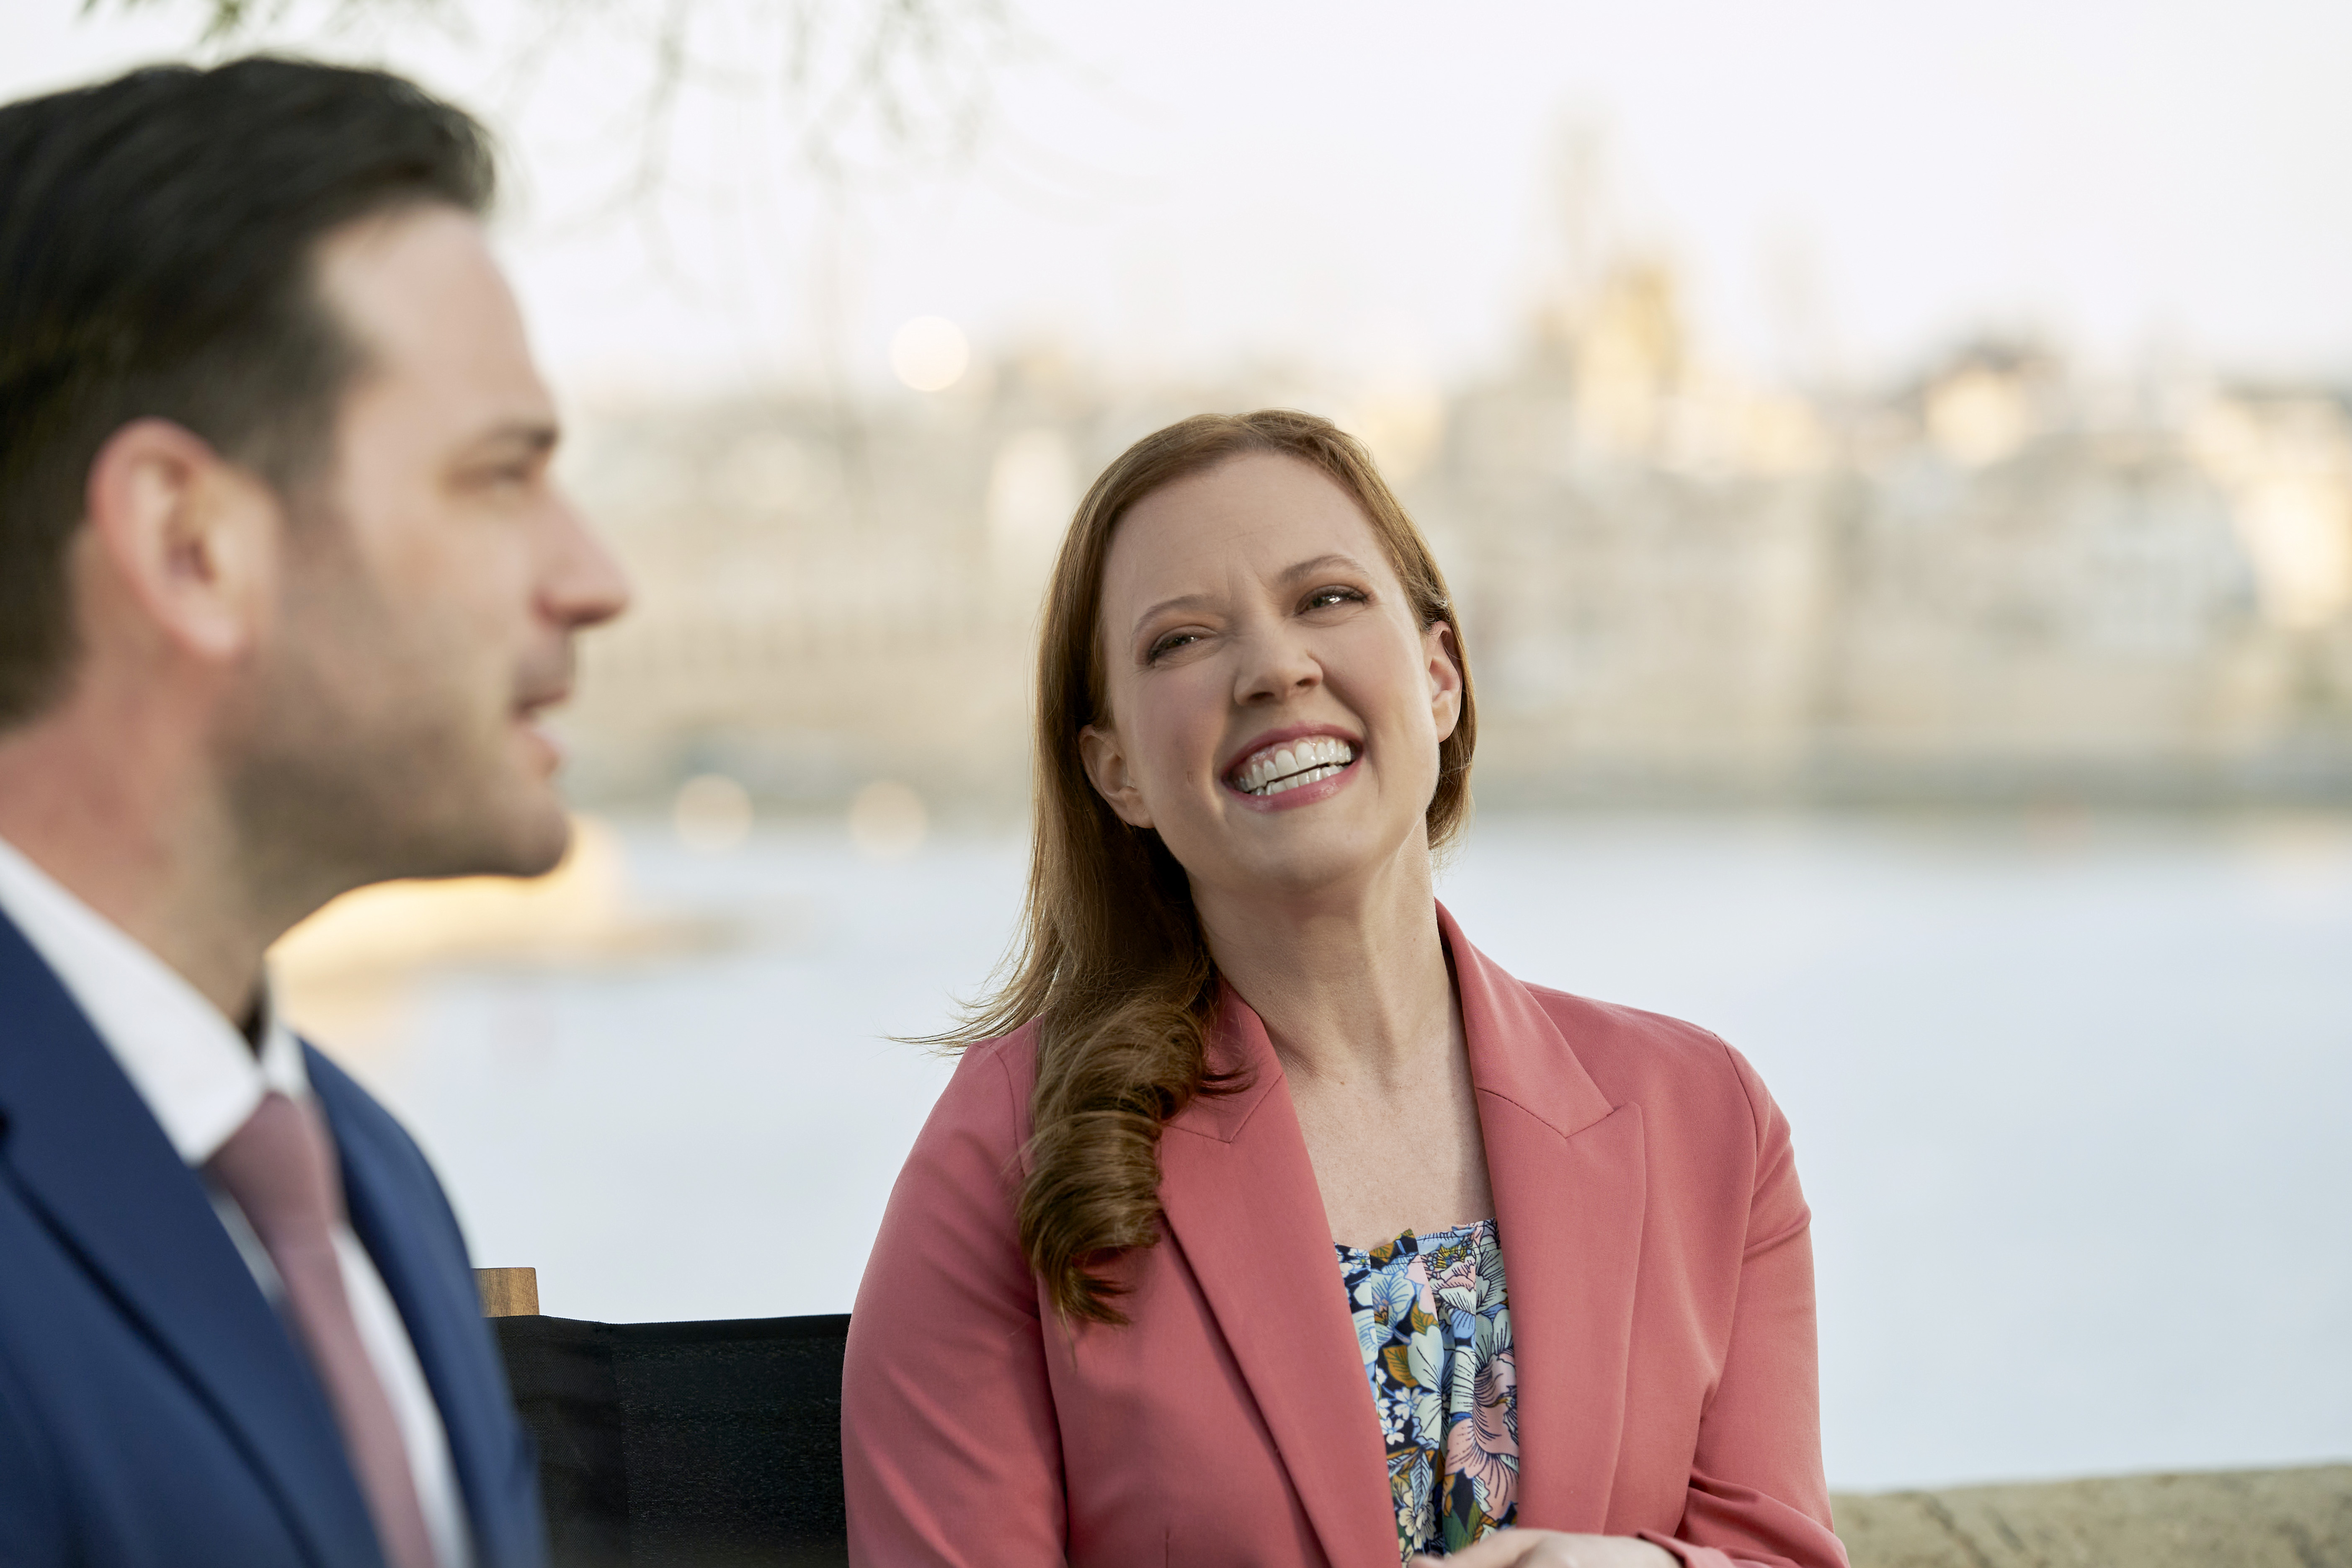 Smiling Patti Murin with Colin Donnell in profile in 'To Catch a Spy'